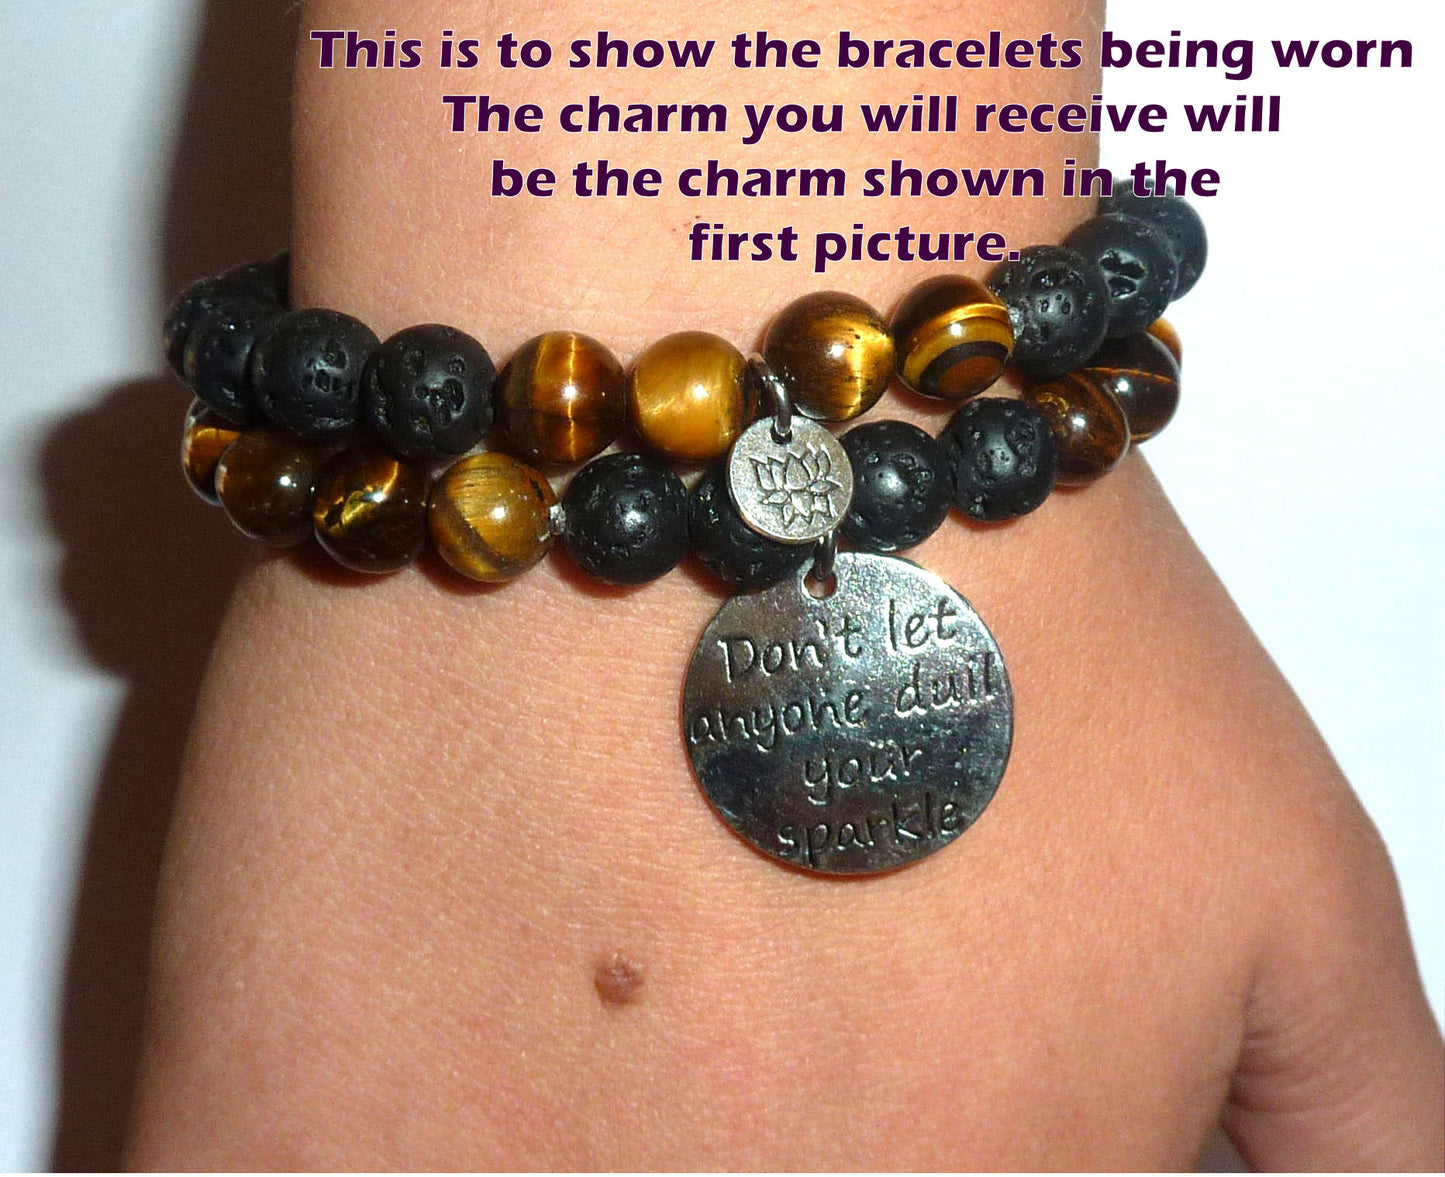 She Believed She Could So She Did - Women's Tiger Eye & Black Lava Diffuser Yoga Beads Charm Stretch Bracelet Gift Set